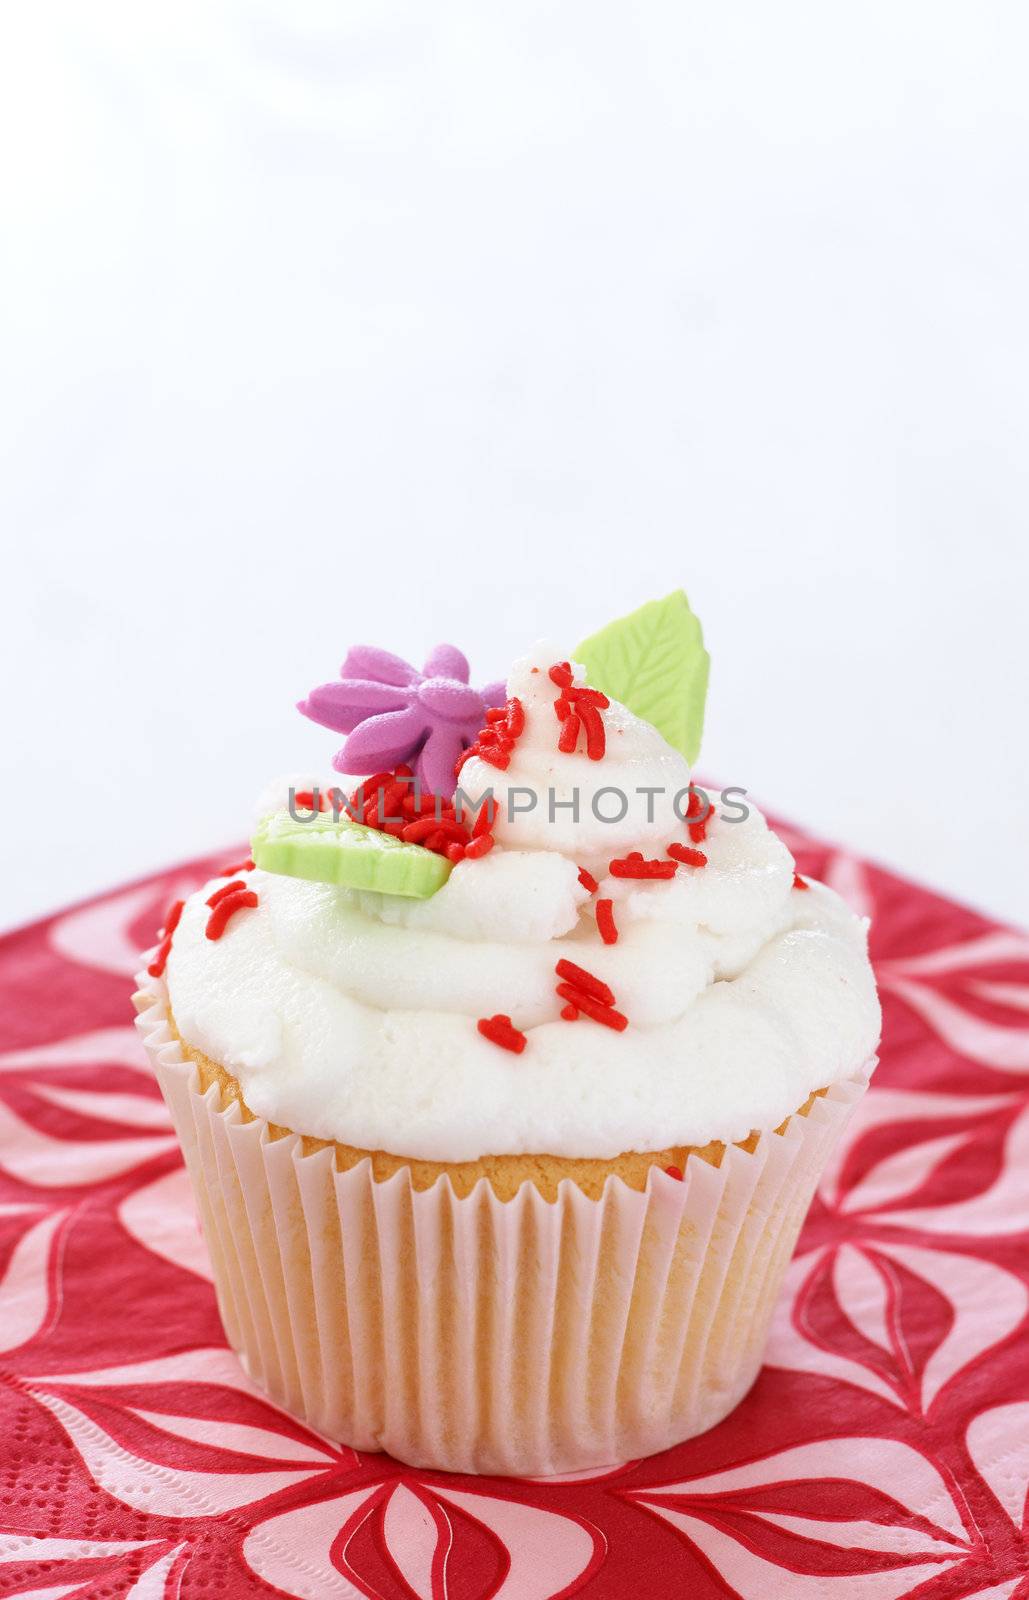 Vanilla cupcake with buttercream icing and flower decorations on white background